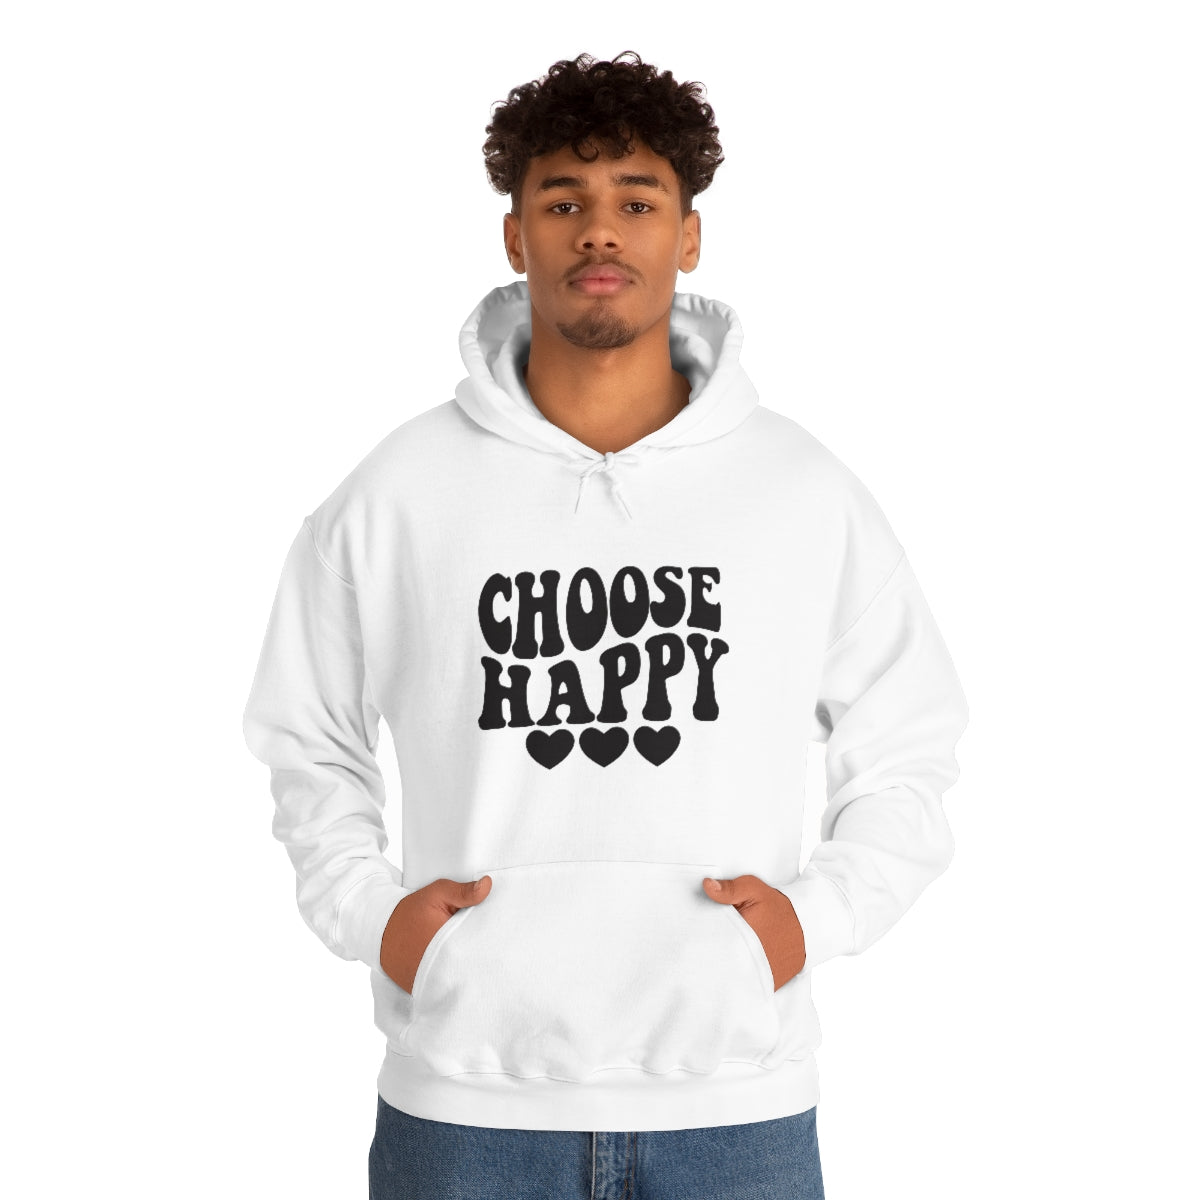 Choose Happiness Every Day with Our "Choose Happy" Sweatshirt